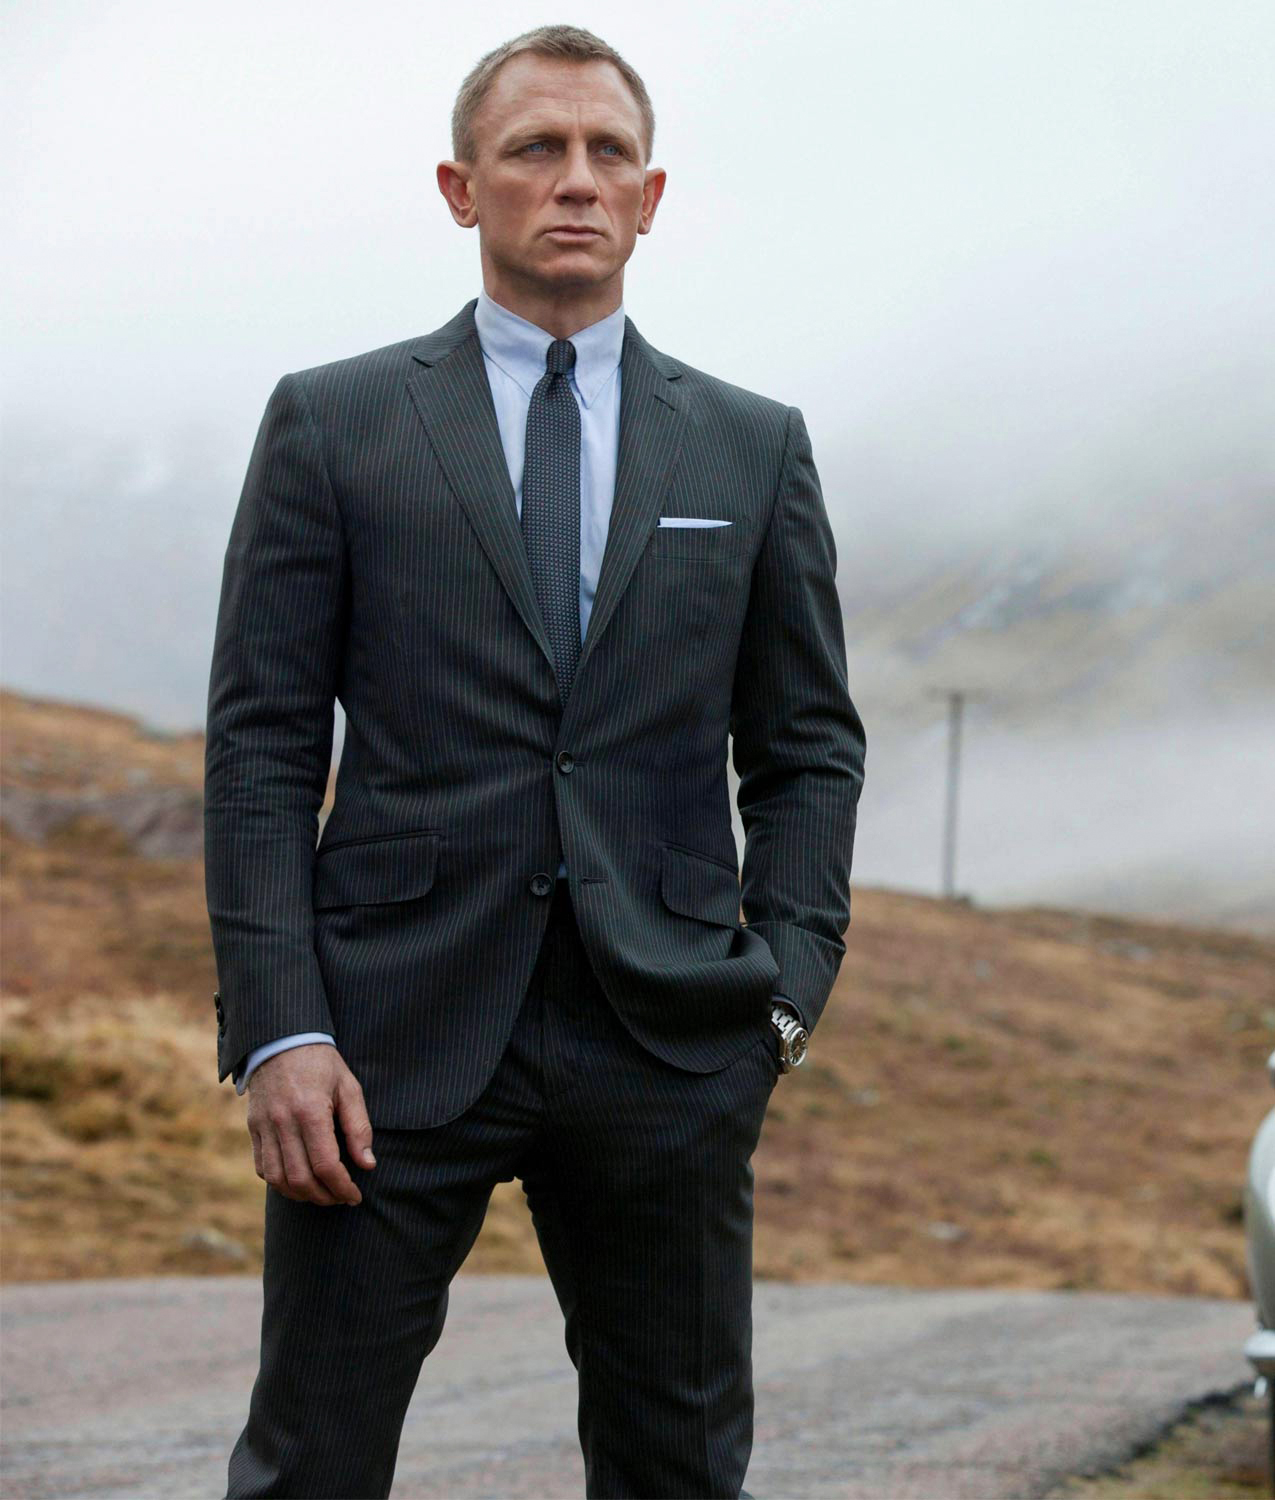 James Bond wears iconic pinstripe charcoal grey suit